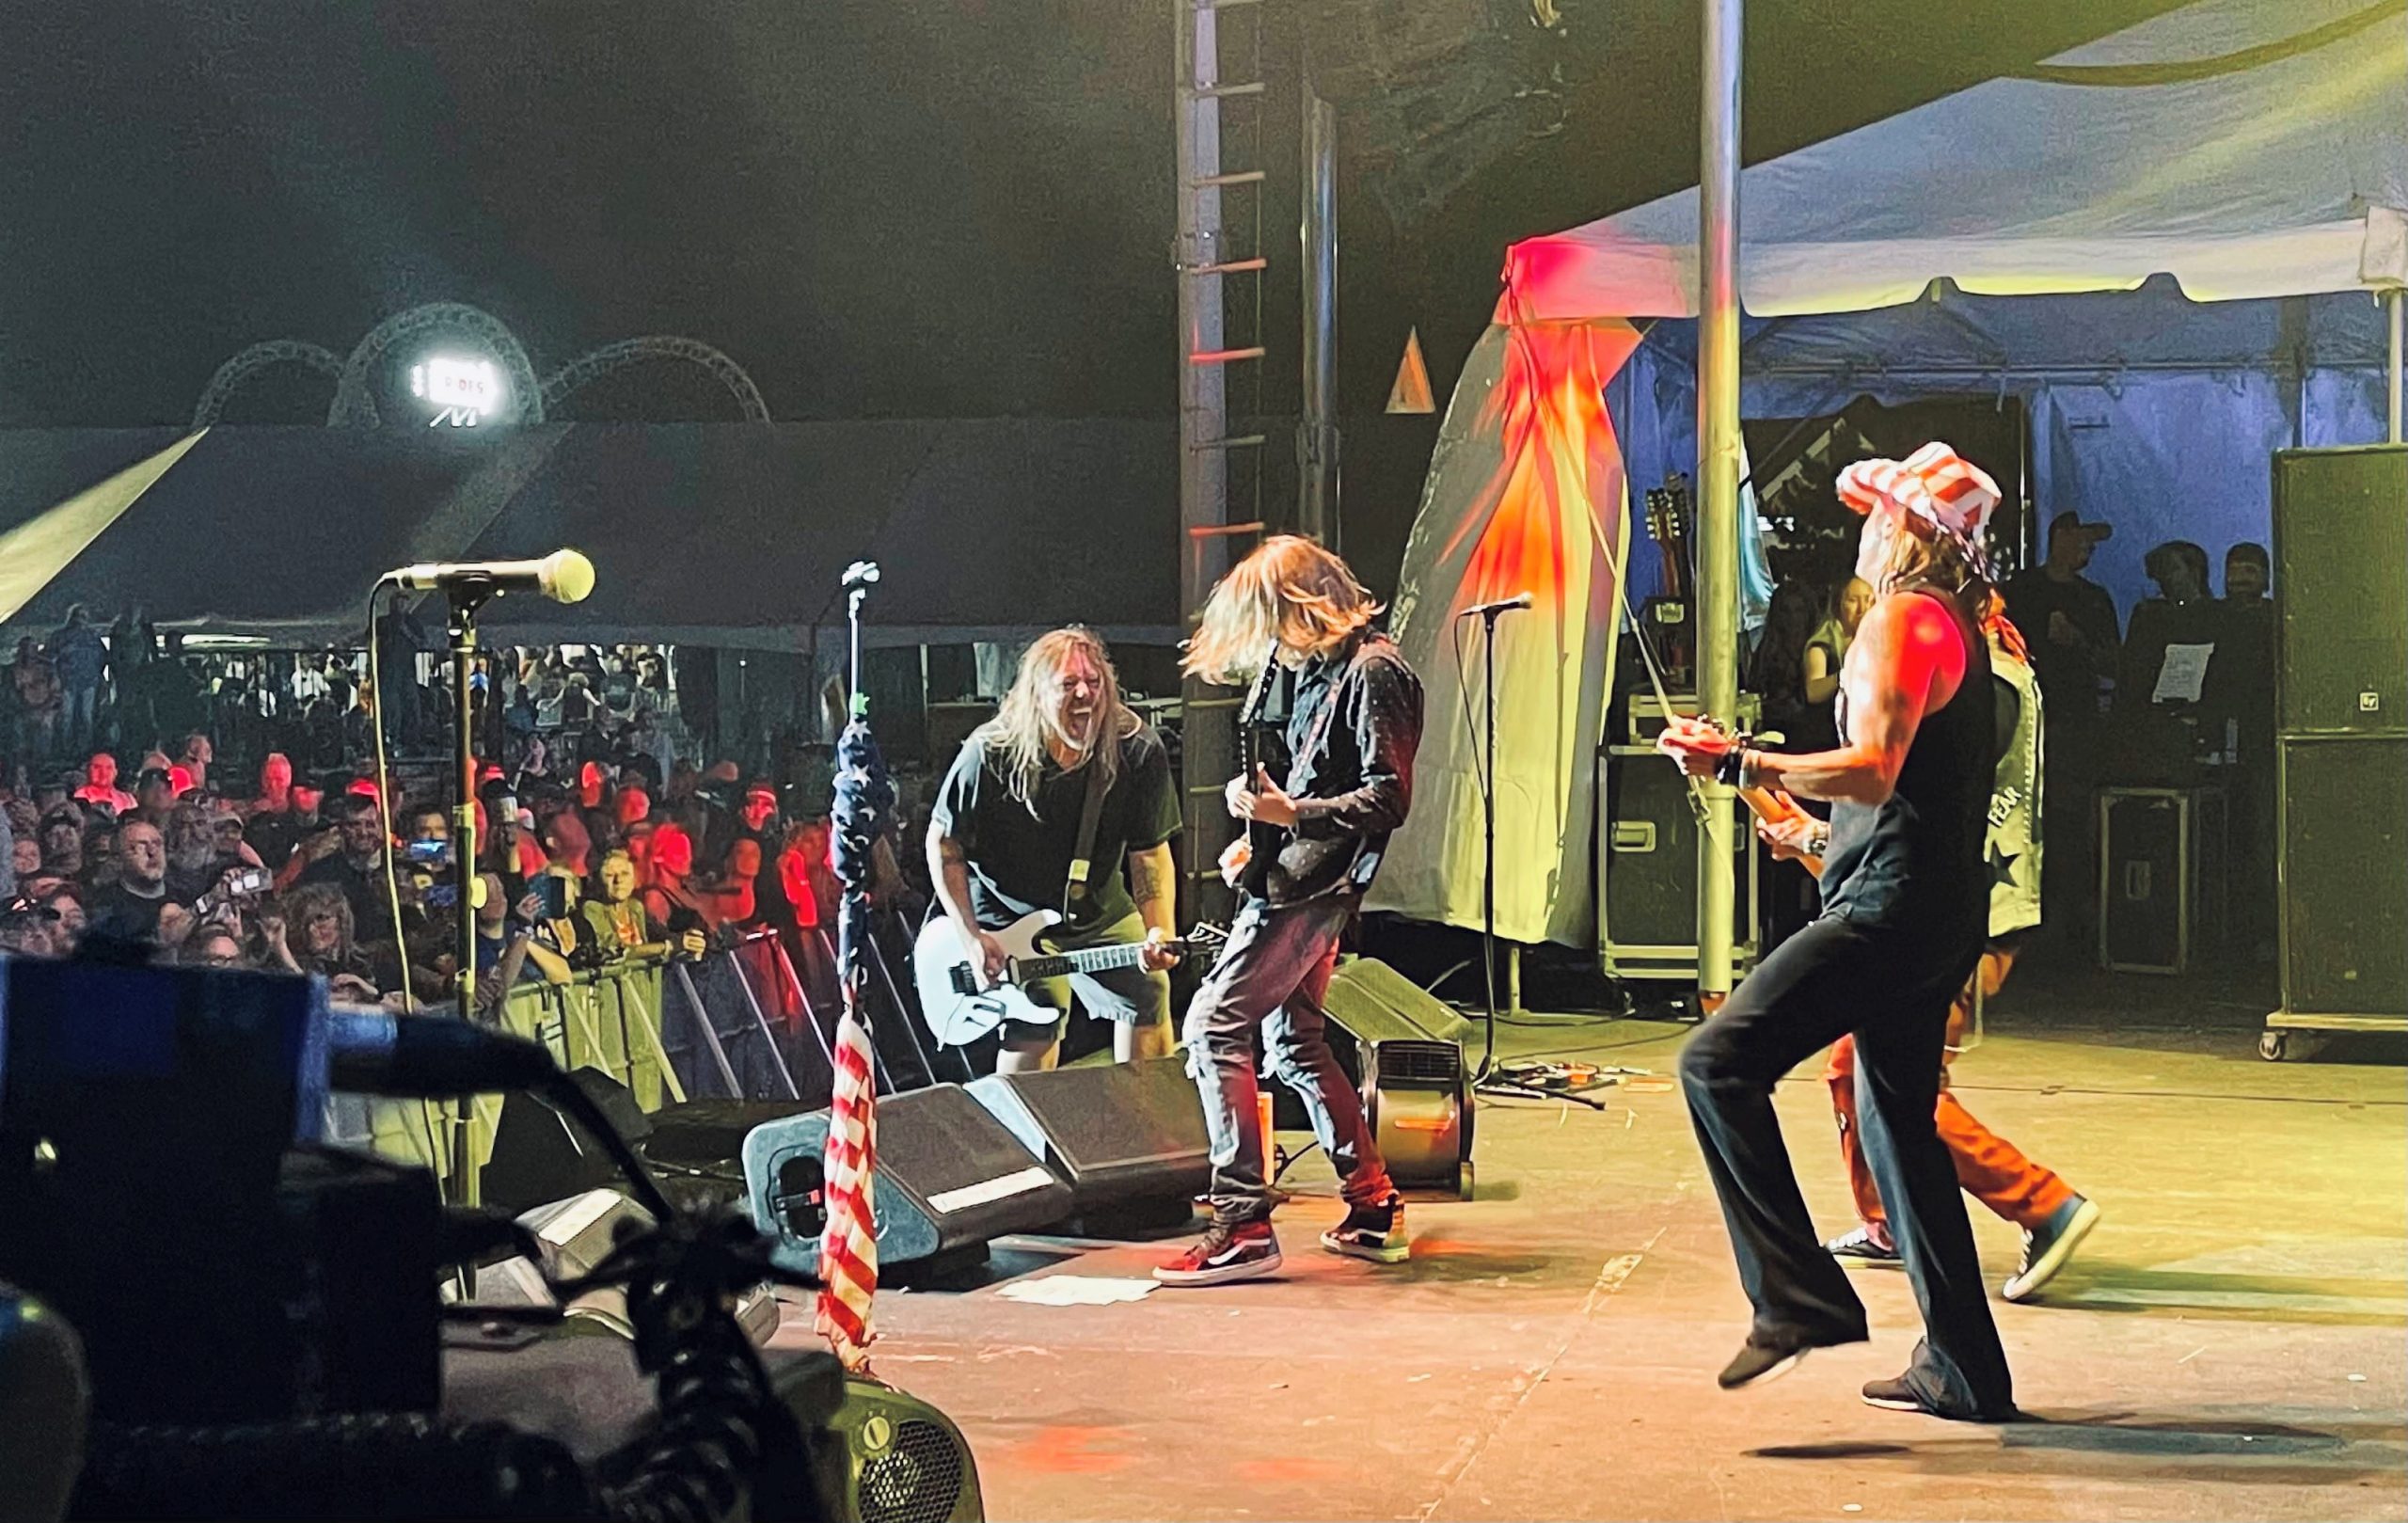 Local Teen Performed With Bret Michaels Before 18,000 At BikeFest